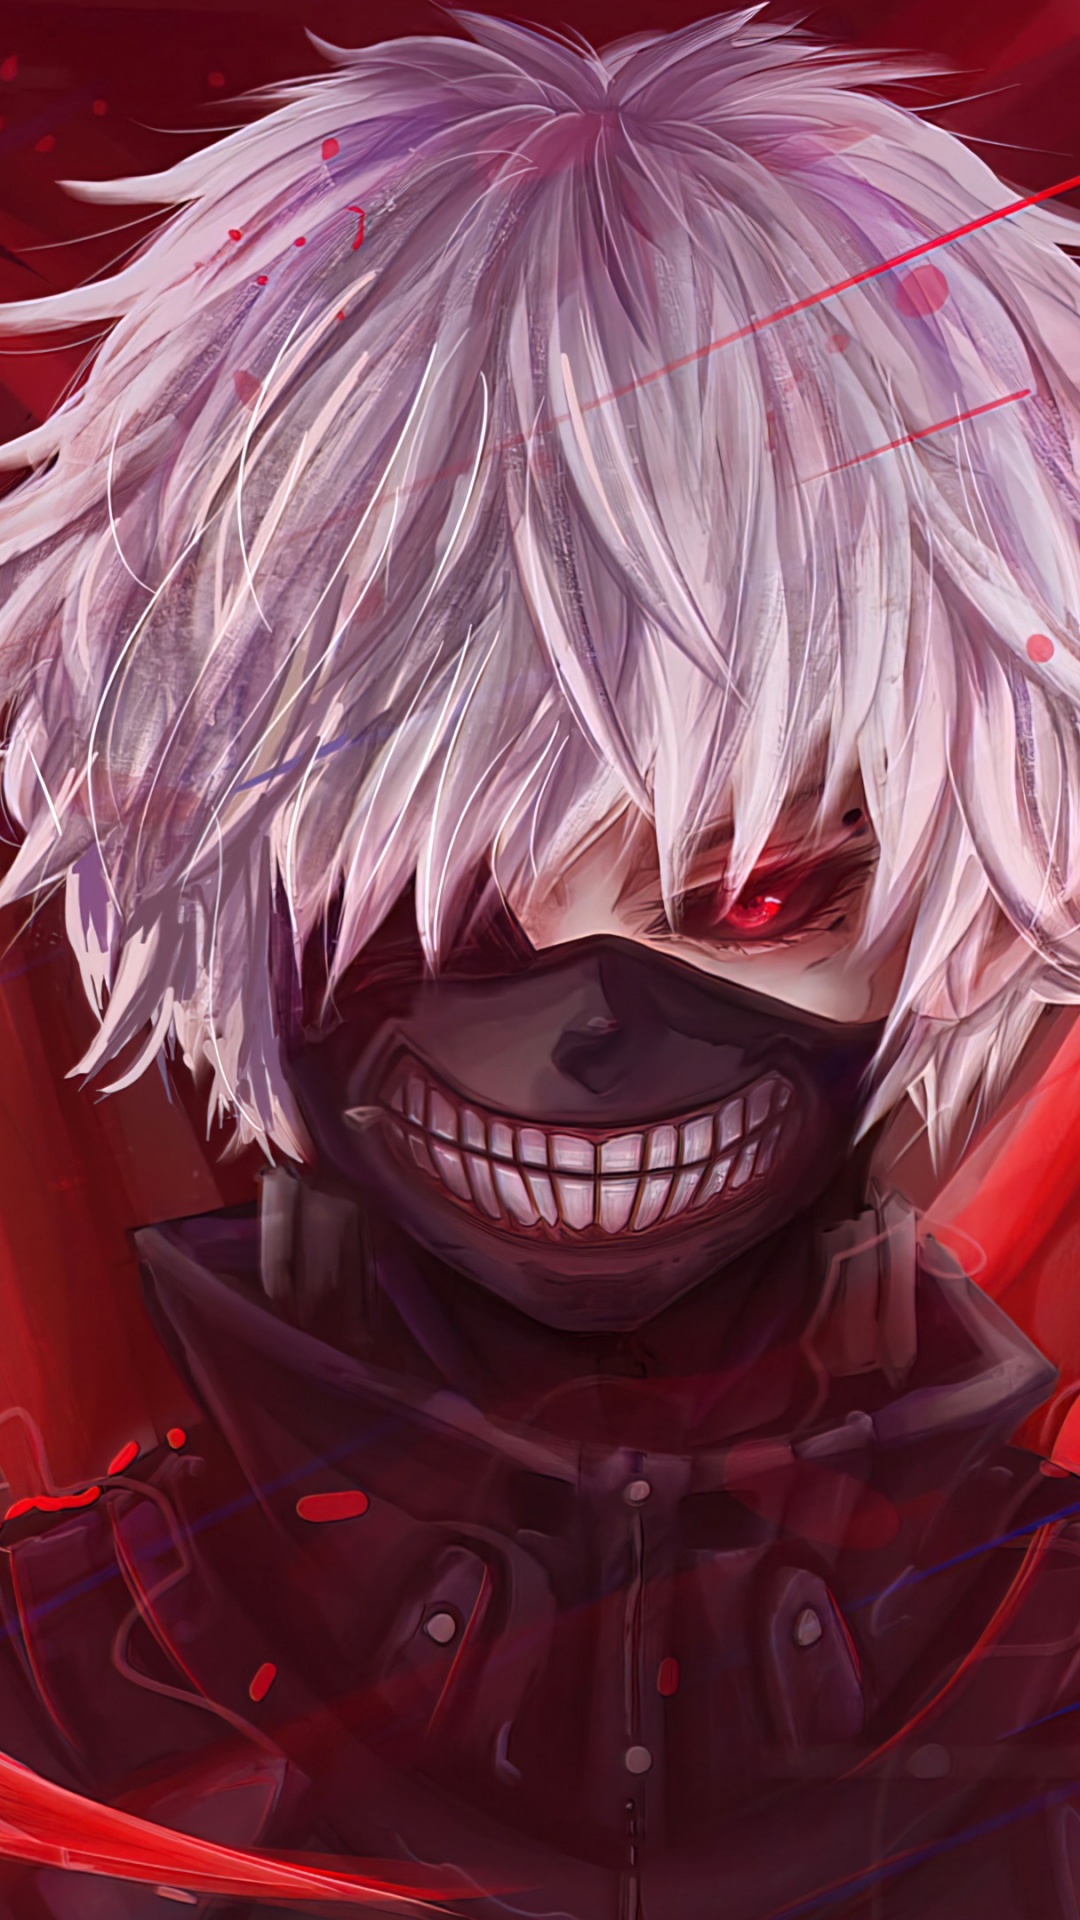 720x1280 Tokyo Ghoul Wallpapers for Mobile Phone [HD]